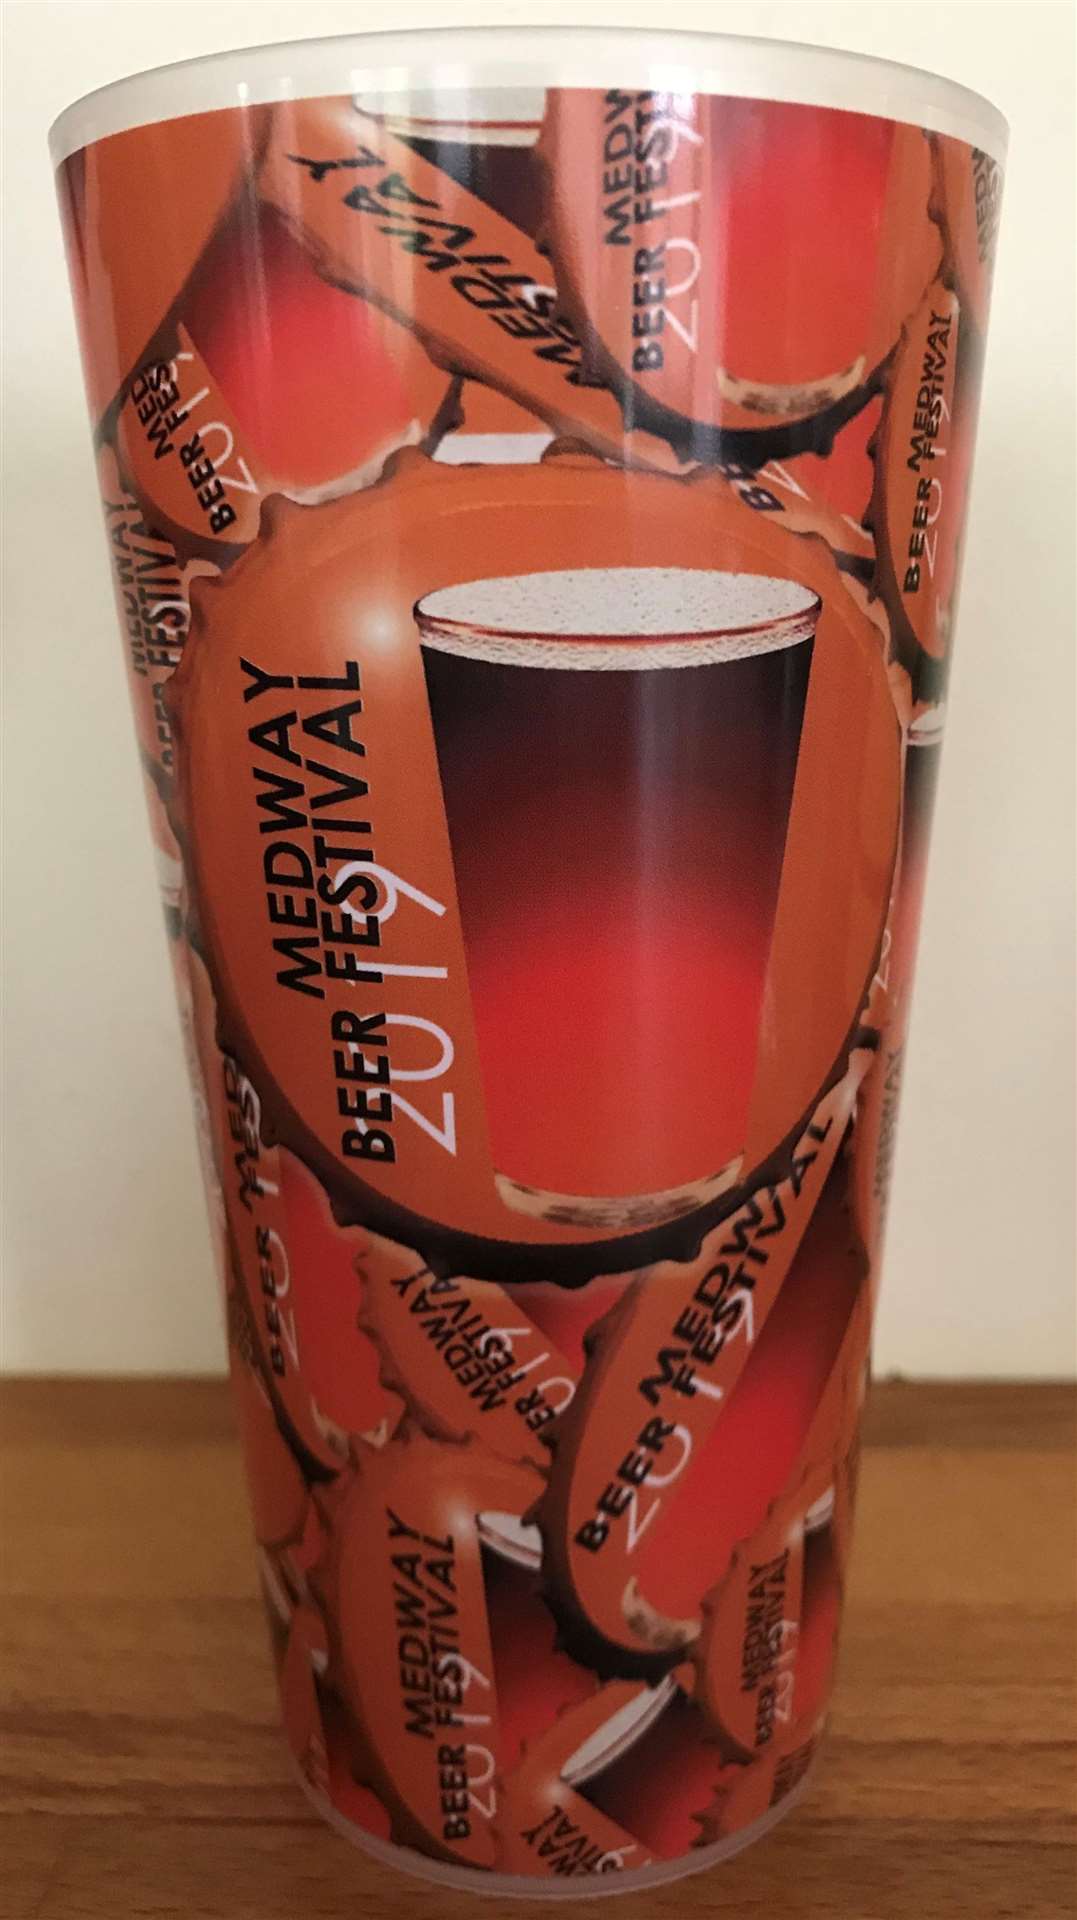 Recyclable cups will be used at this year's Medway Beer Festival